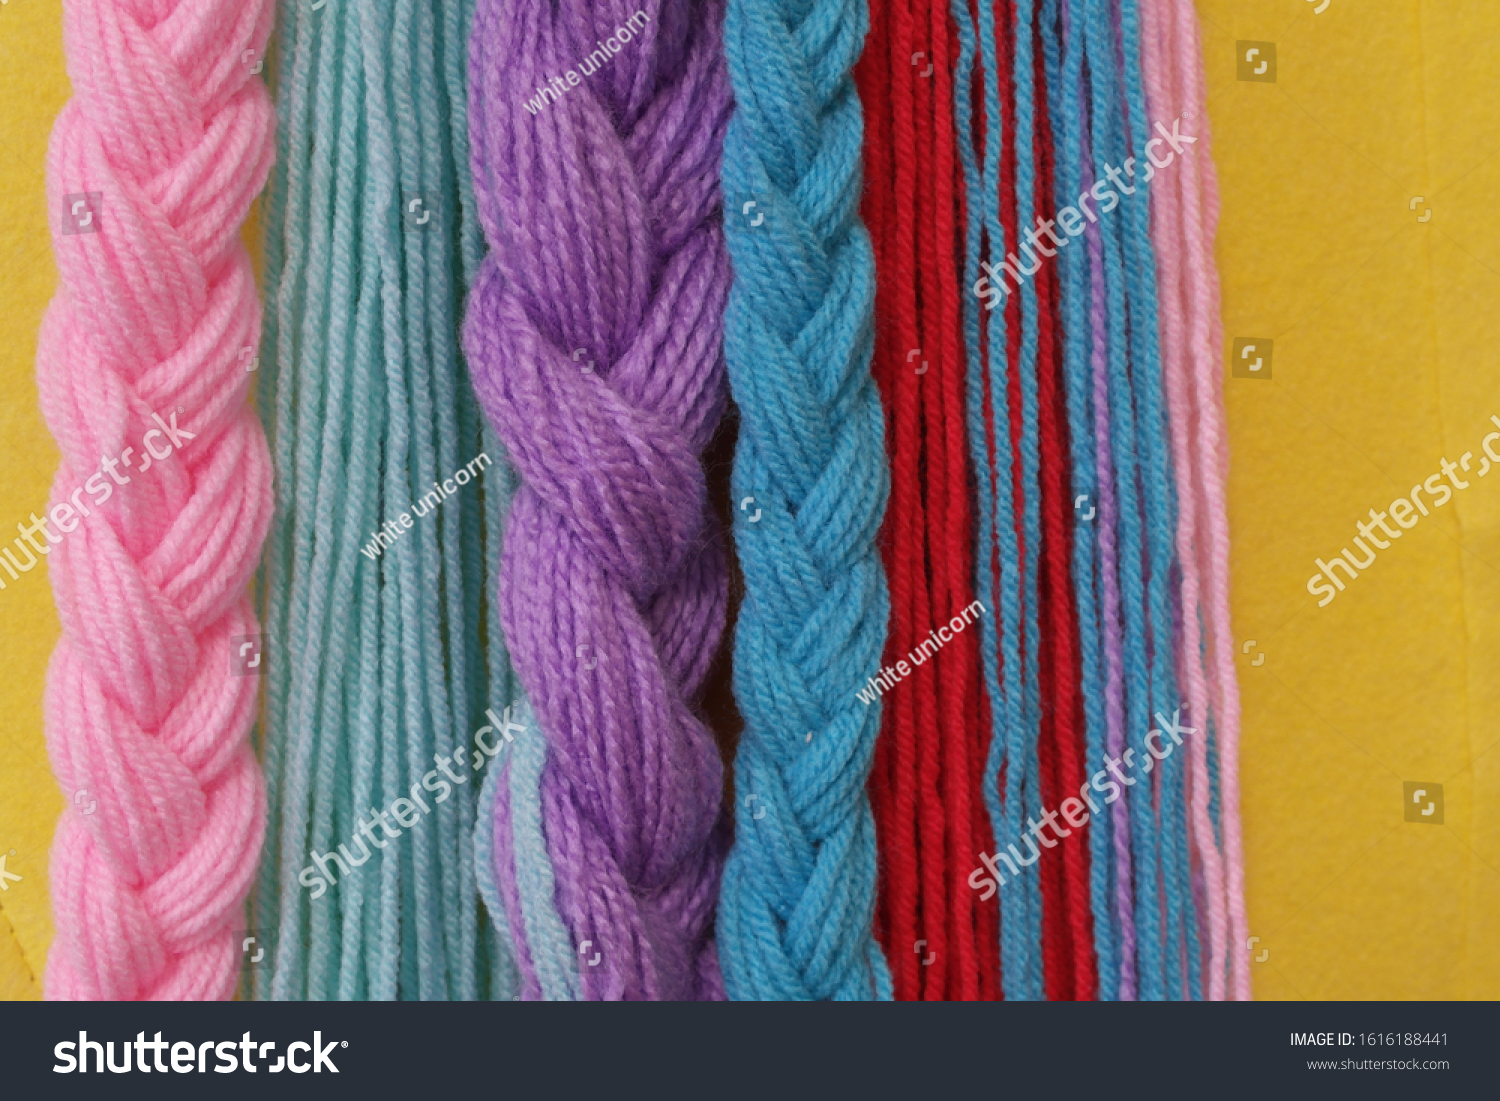 multi-colored yarn with threads and braided. Vibrant colors #1616188441